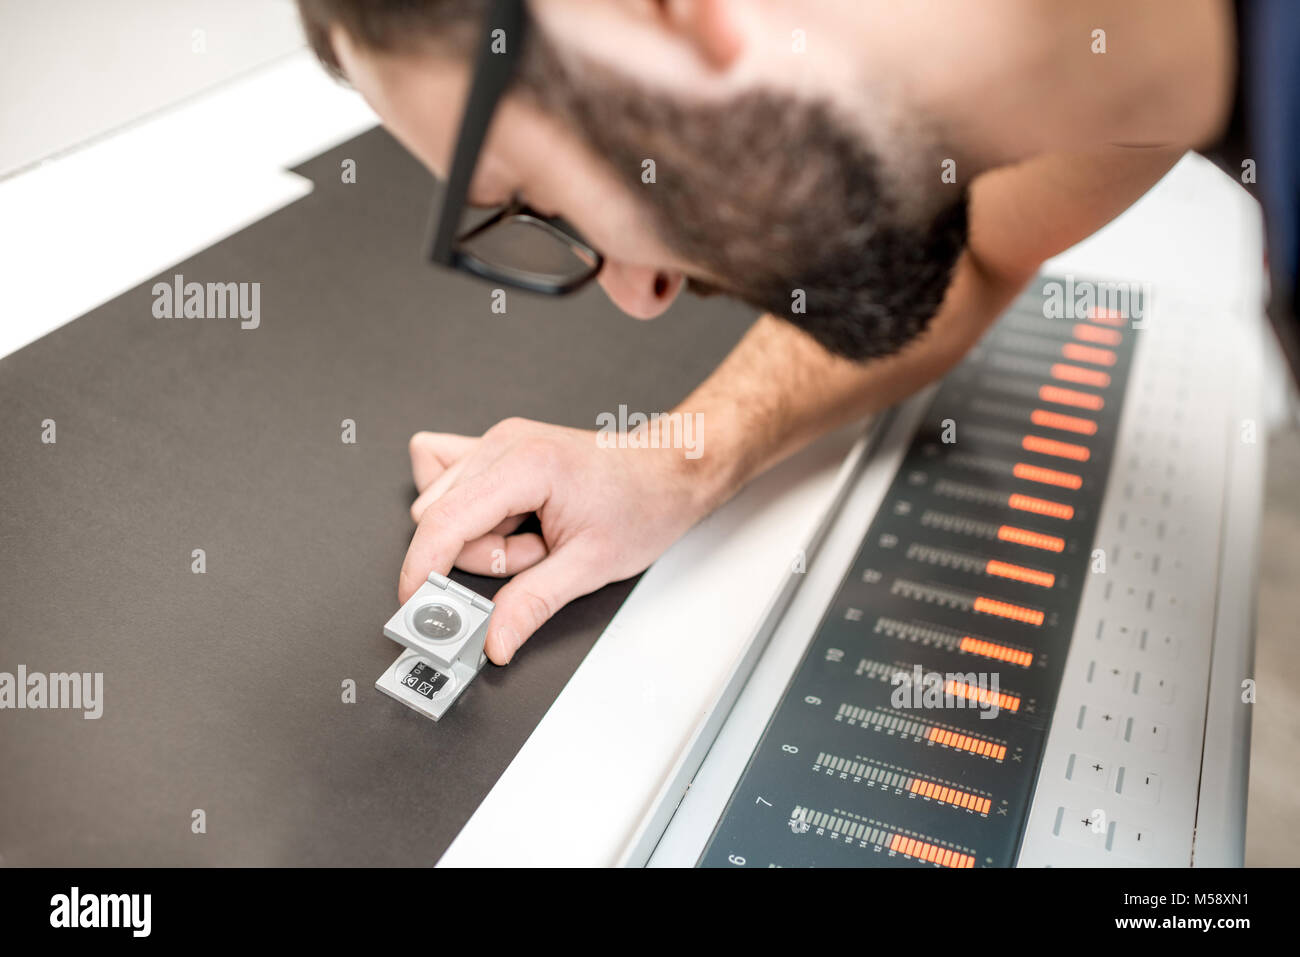 Checking the quality of the printing with magnifying glass Stock Photo